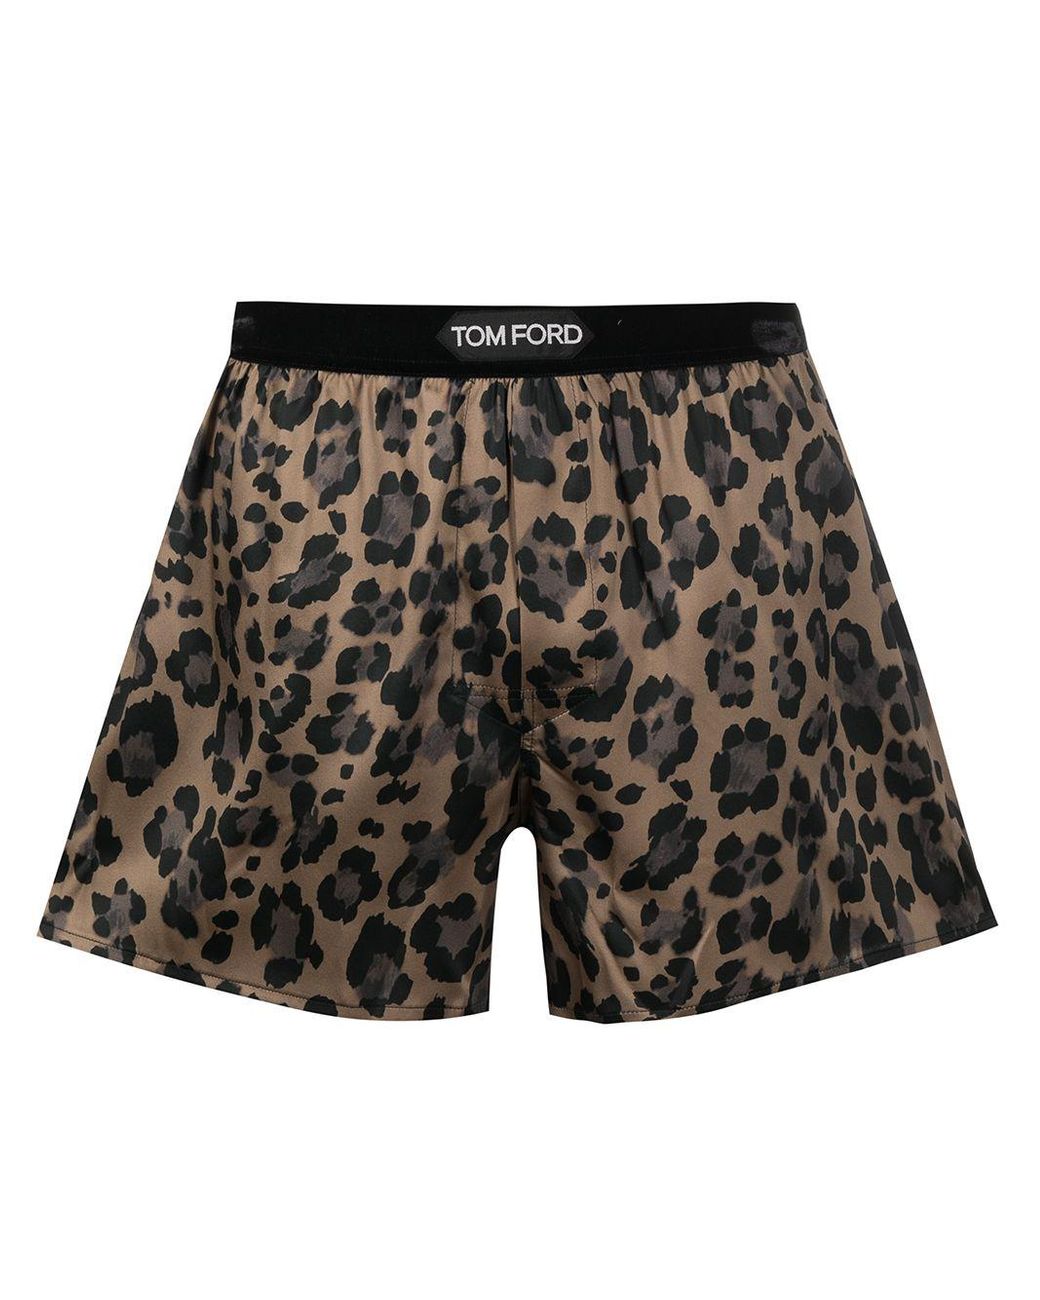 Tom Ford Leopard-print Silk Boxers in Brown for Men - Lyst